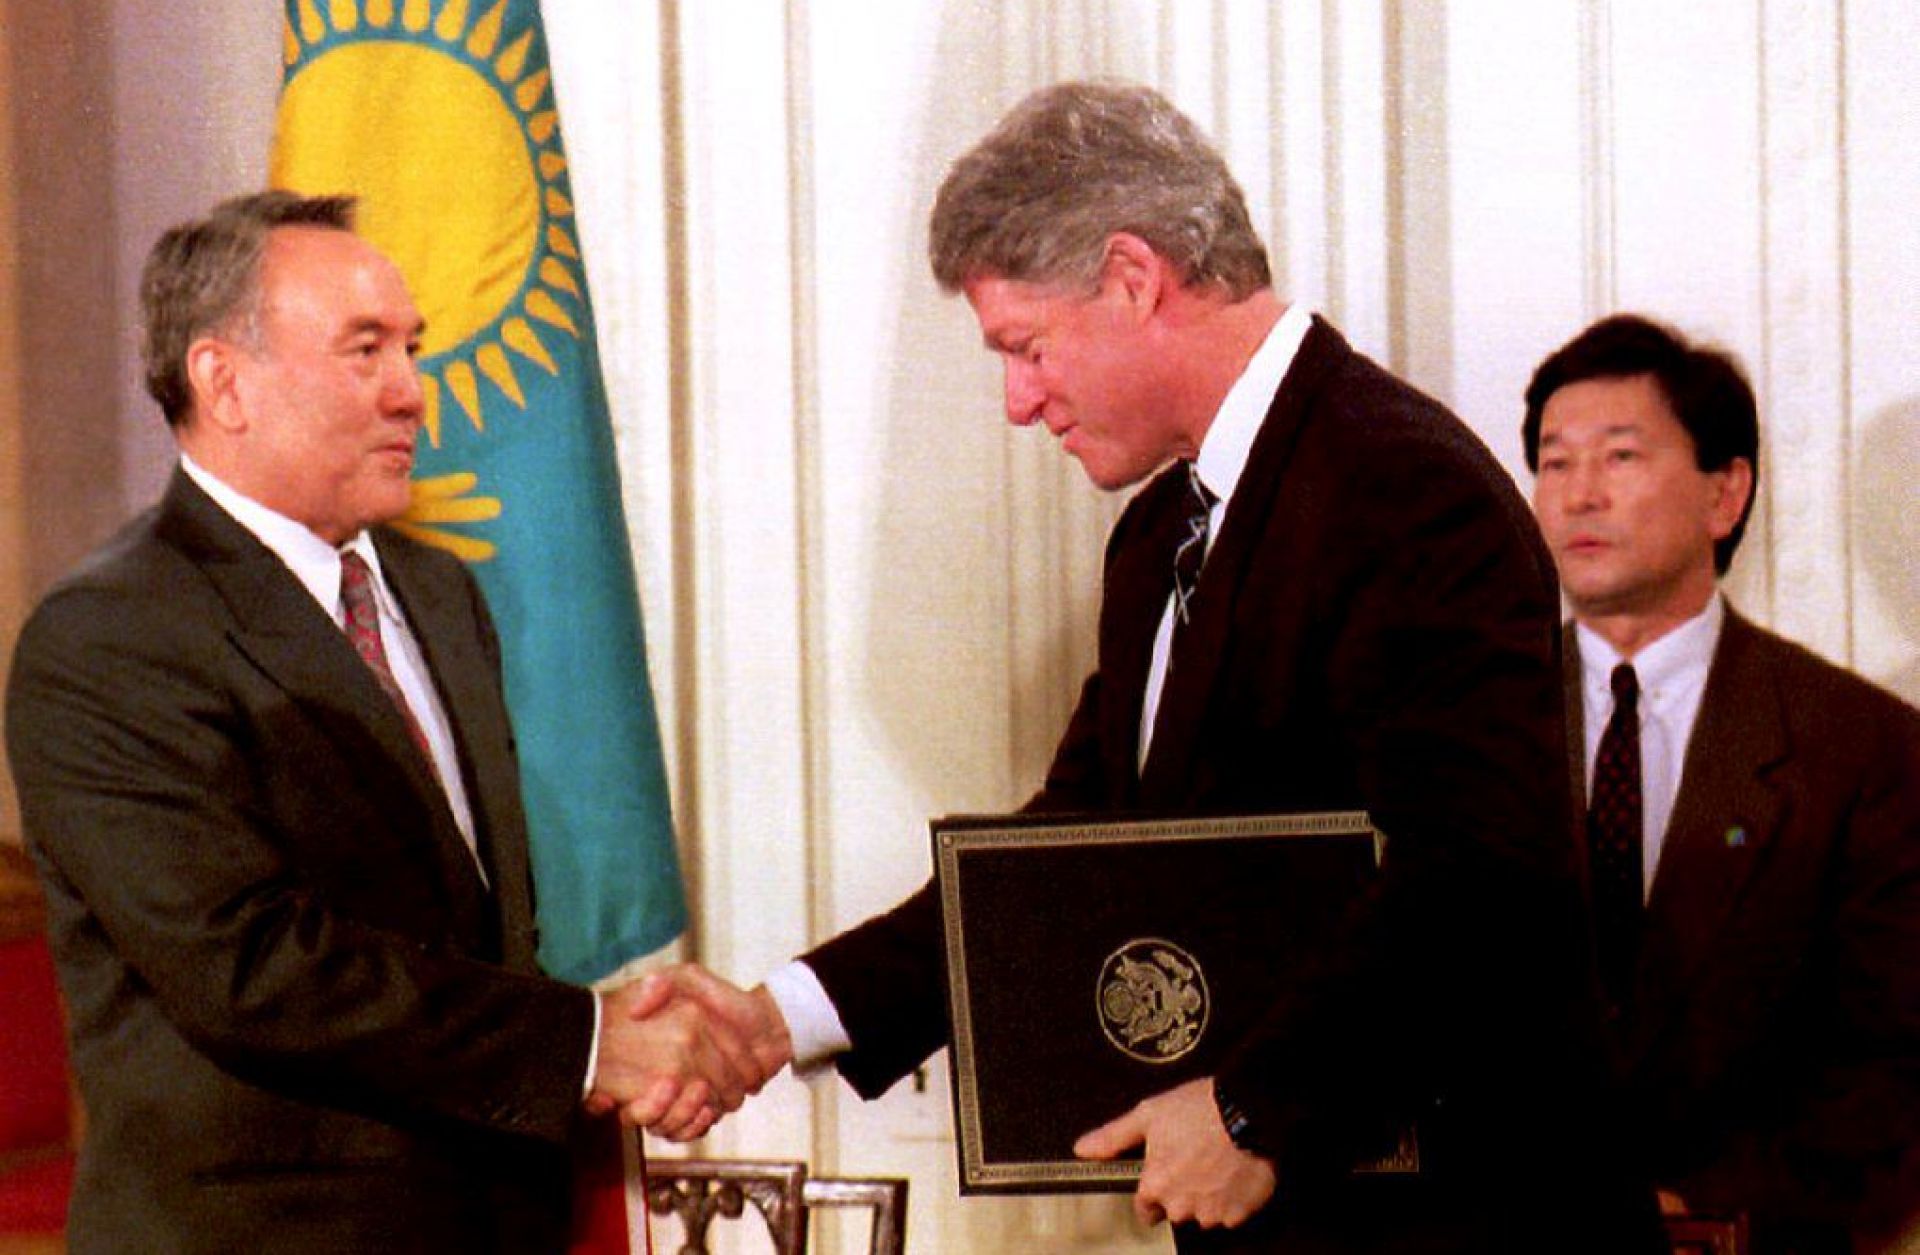 U.S. President Bill Clinton and Kazakh President Nursultan Nazarbayev shake hands at the White House on Feb. 14, 1994, after Nazarbayev presented Clinton with Kazakhstan's accession to the Nuclear Nonproliferation Treaty.